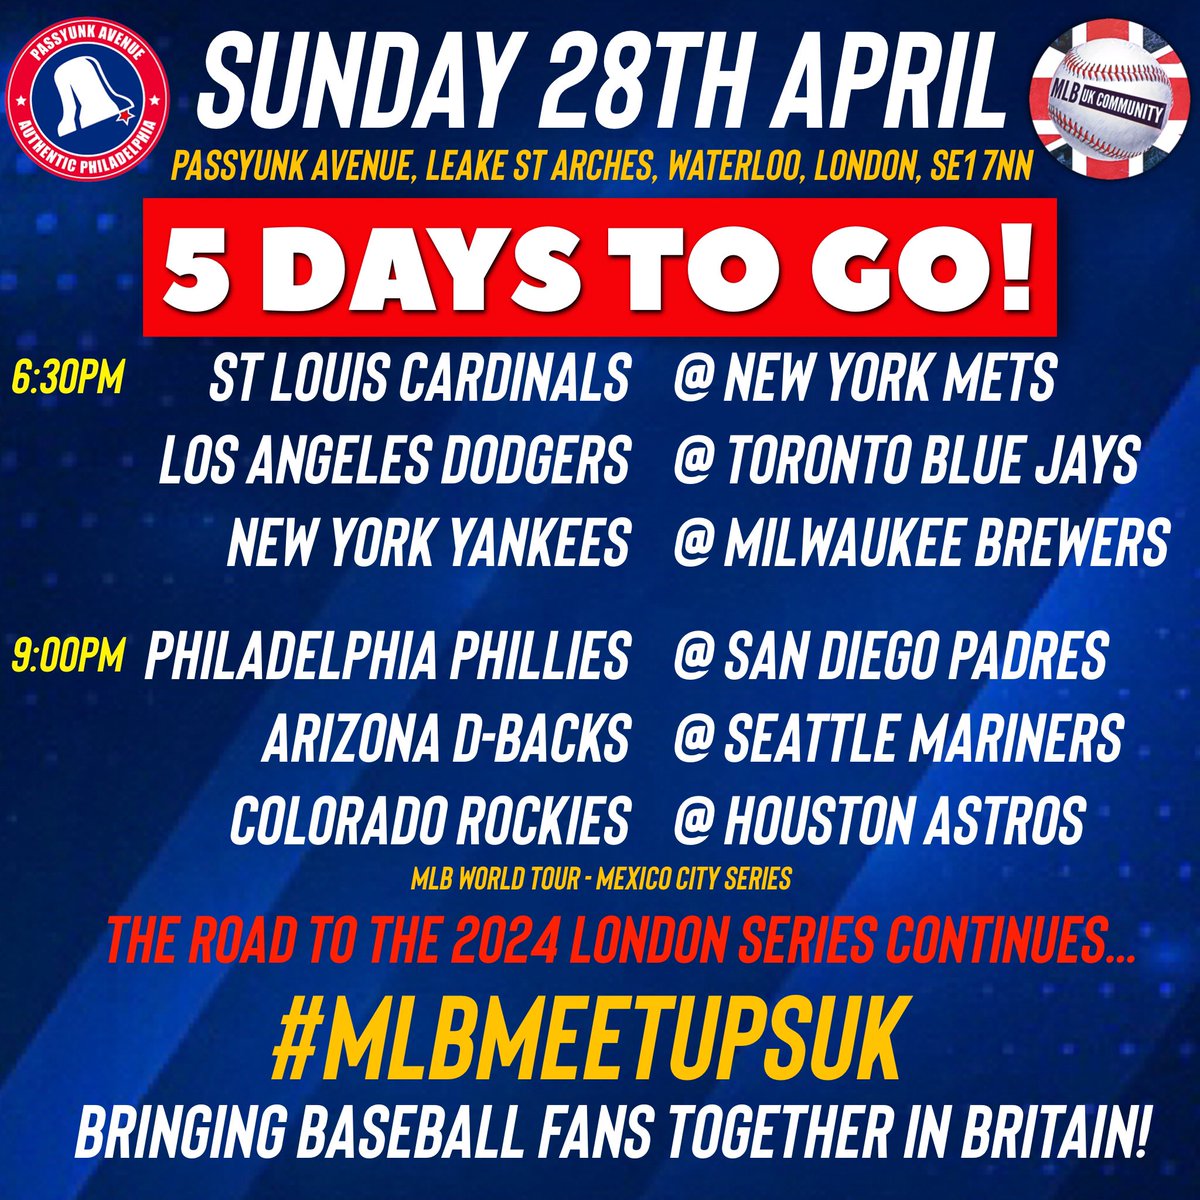 📣WATCH LIVE MLB AT @passyunkavenue SUNDAY 28th APRIL - 5 DAYS TO GO!!📣 The LONDON SERIES is just over 6 weeks away! Come & join MLB fans from 5pm this Sunday for a huge lineup 🔥 PLUS: 🇬🇧MLB LONDON SERIES-THEMED PRIZES!!⚾️ BRING. IT. ON!! 😃🧢🇬🇧⚾️🌭🍻 #MLBMeetupsUK🇬🇧⚾️